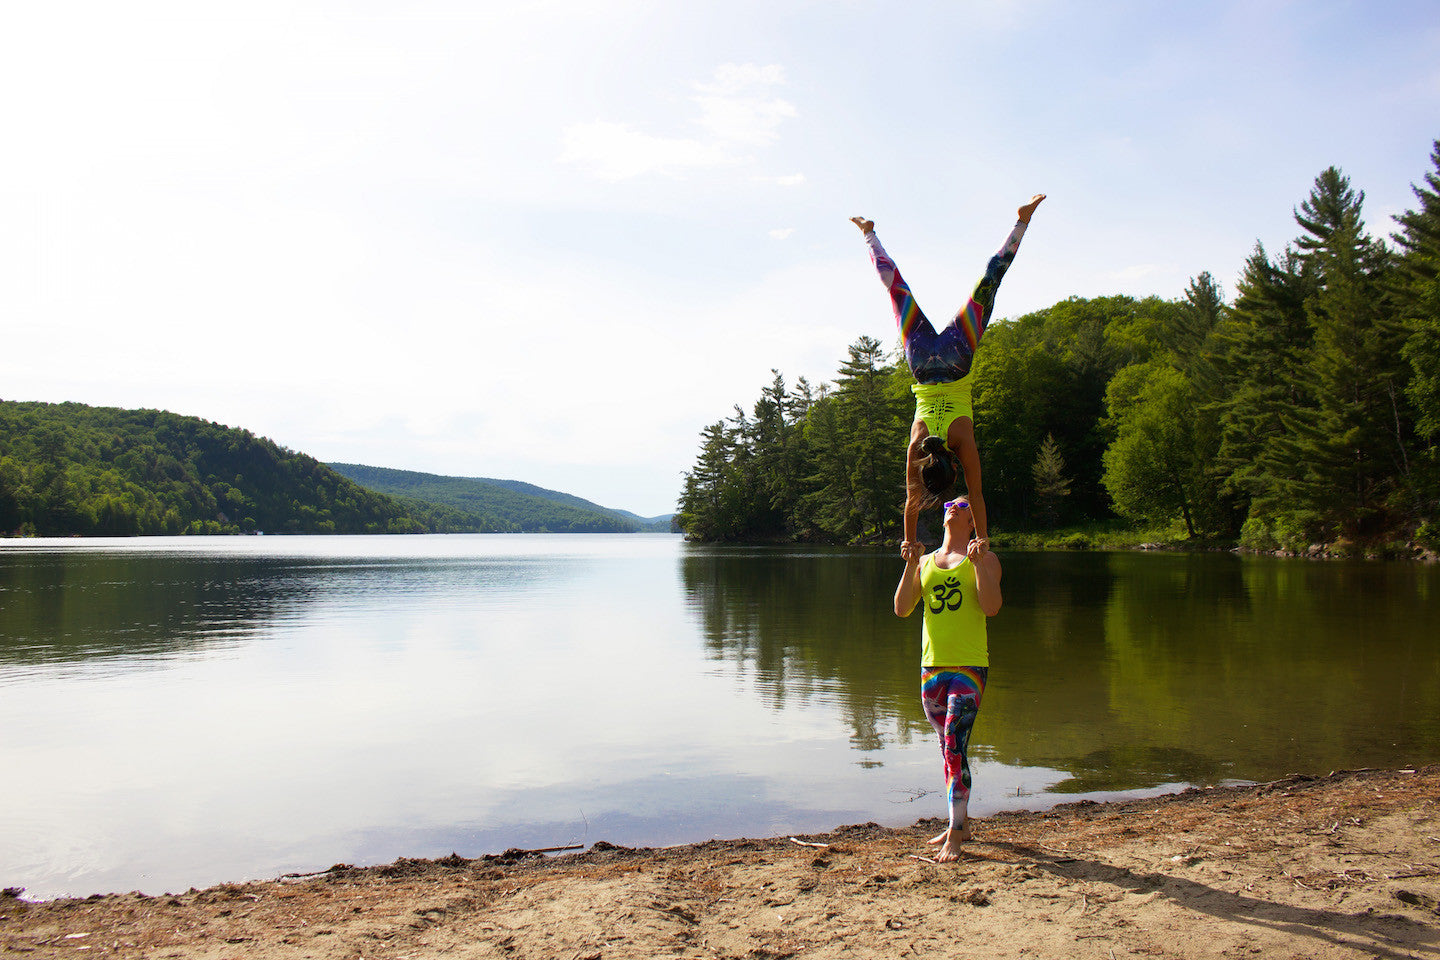 Acrobatic Yoga Pose - Hand to Hand (Gatineau Park, just outside of Ottawa)